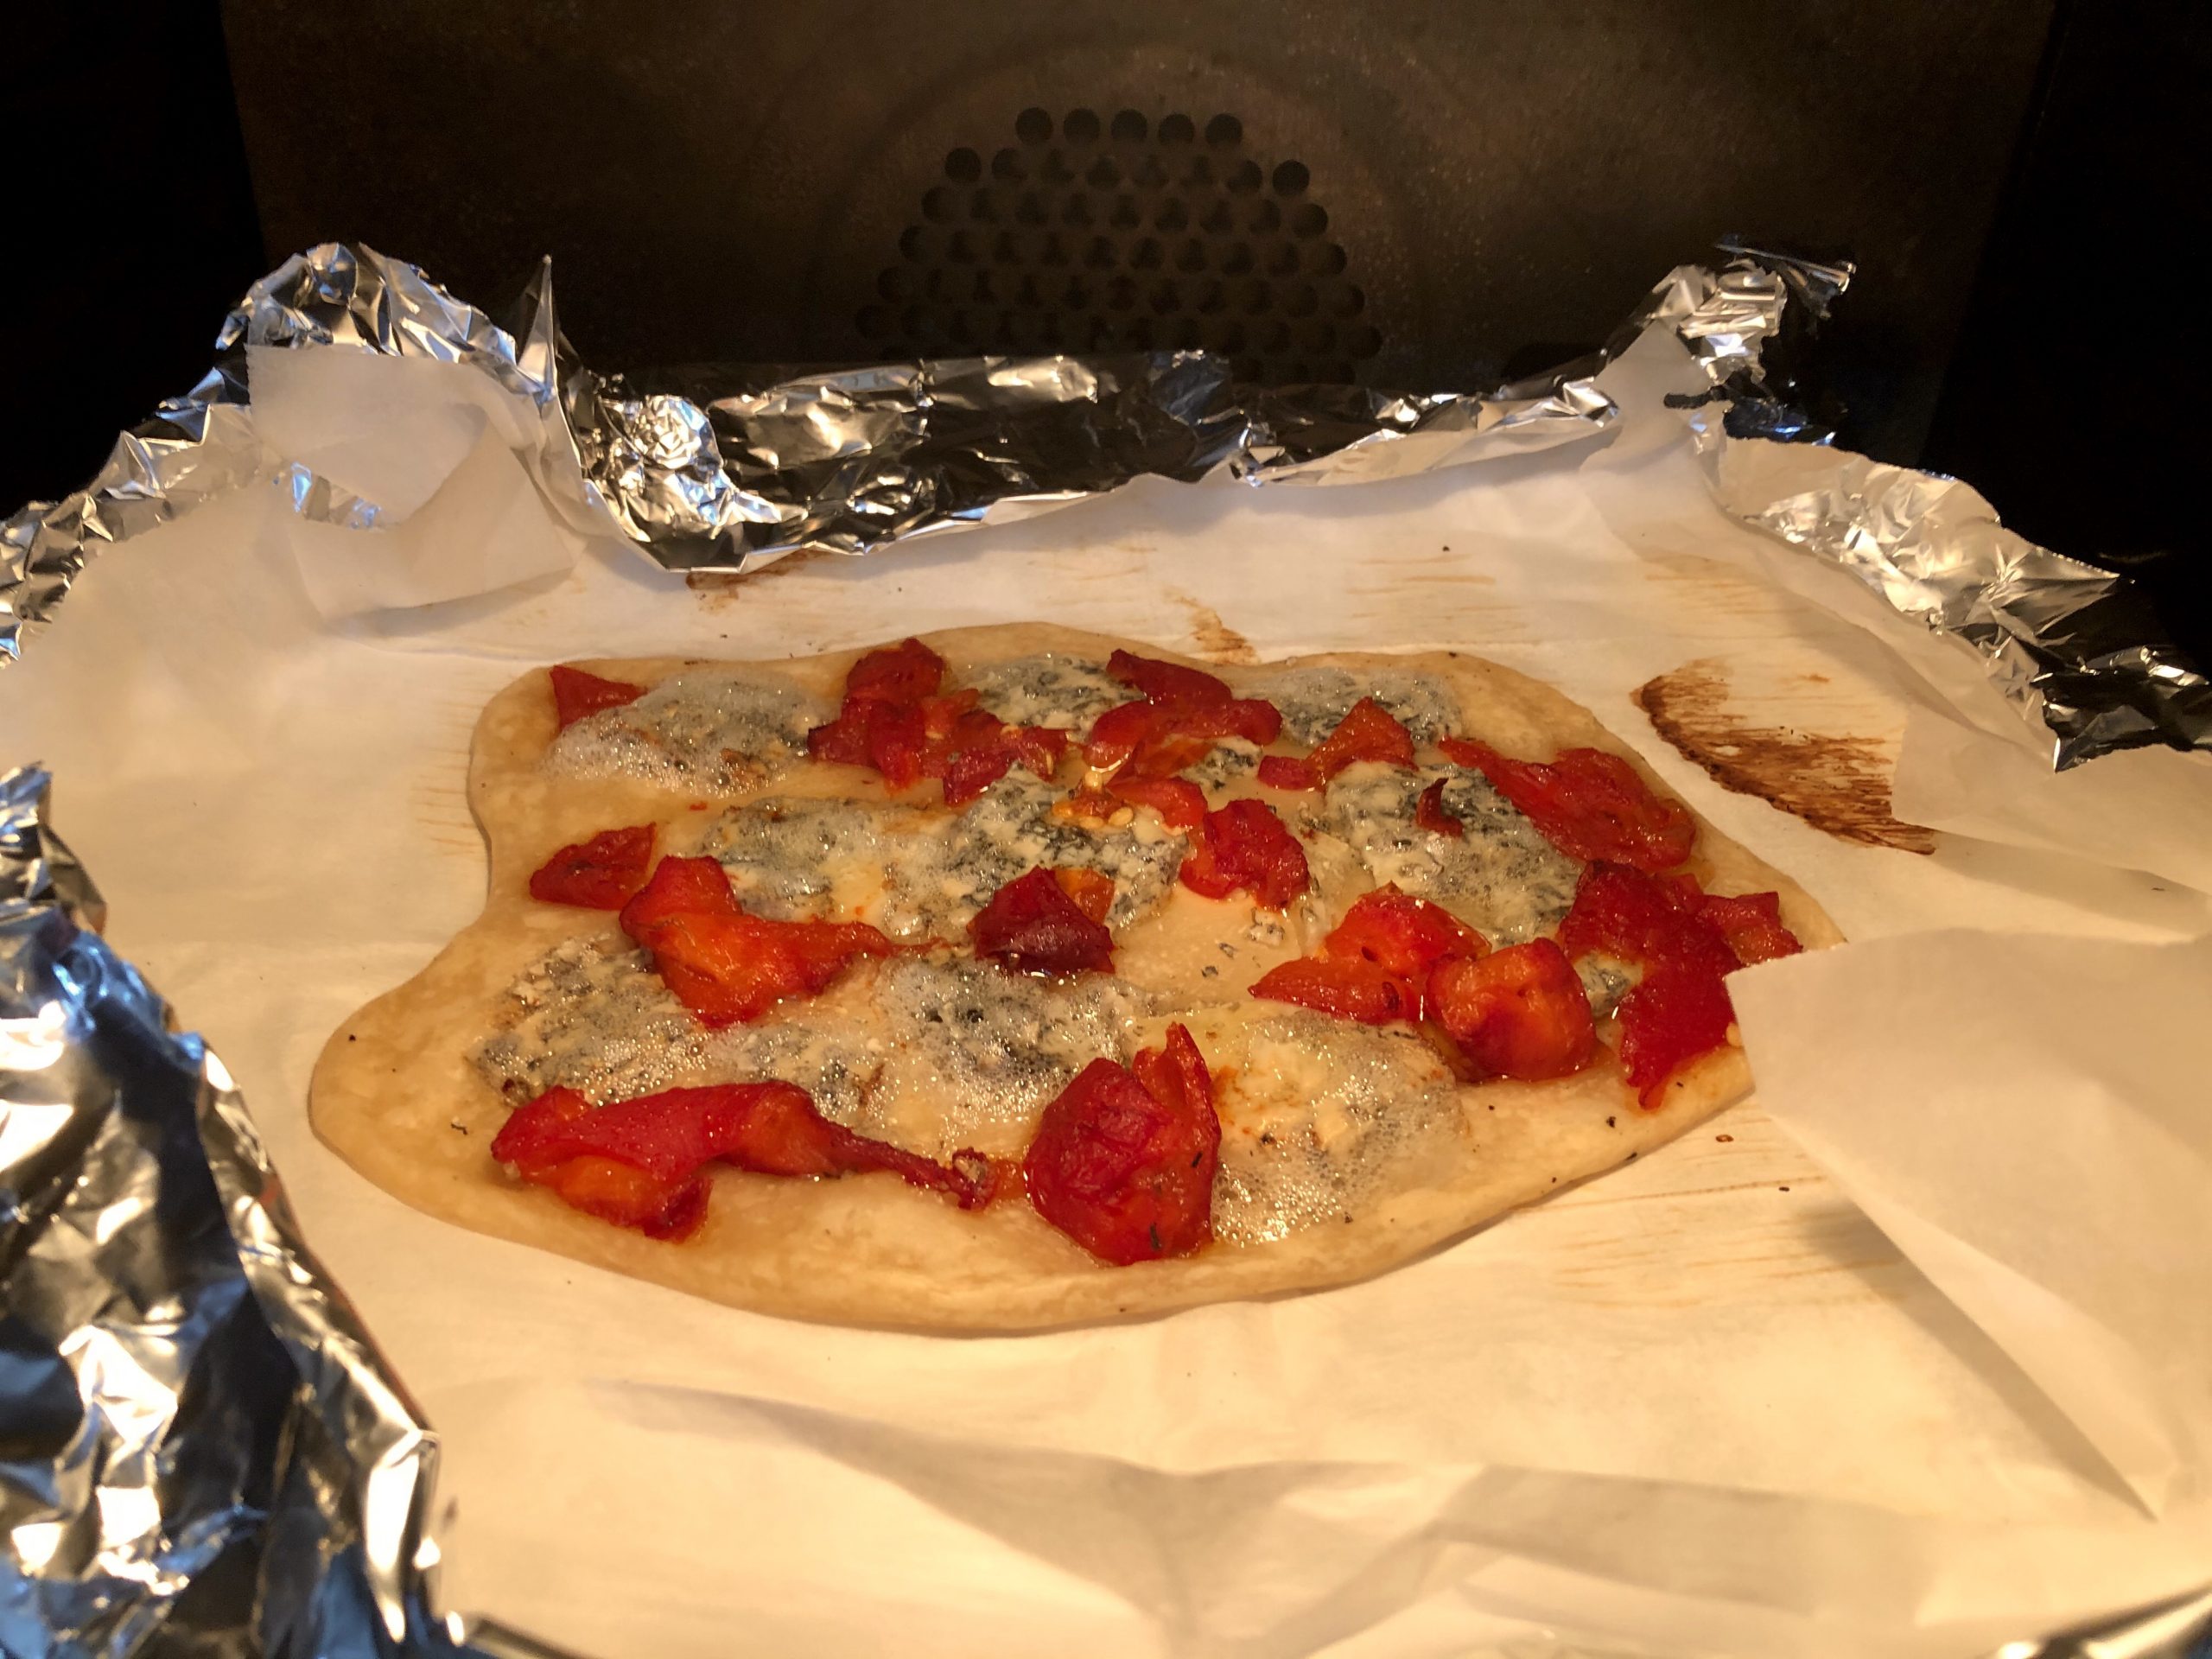 Baking galette with blue cheese and red bell pepper